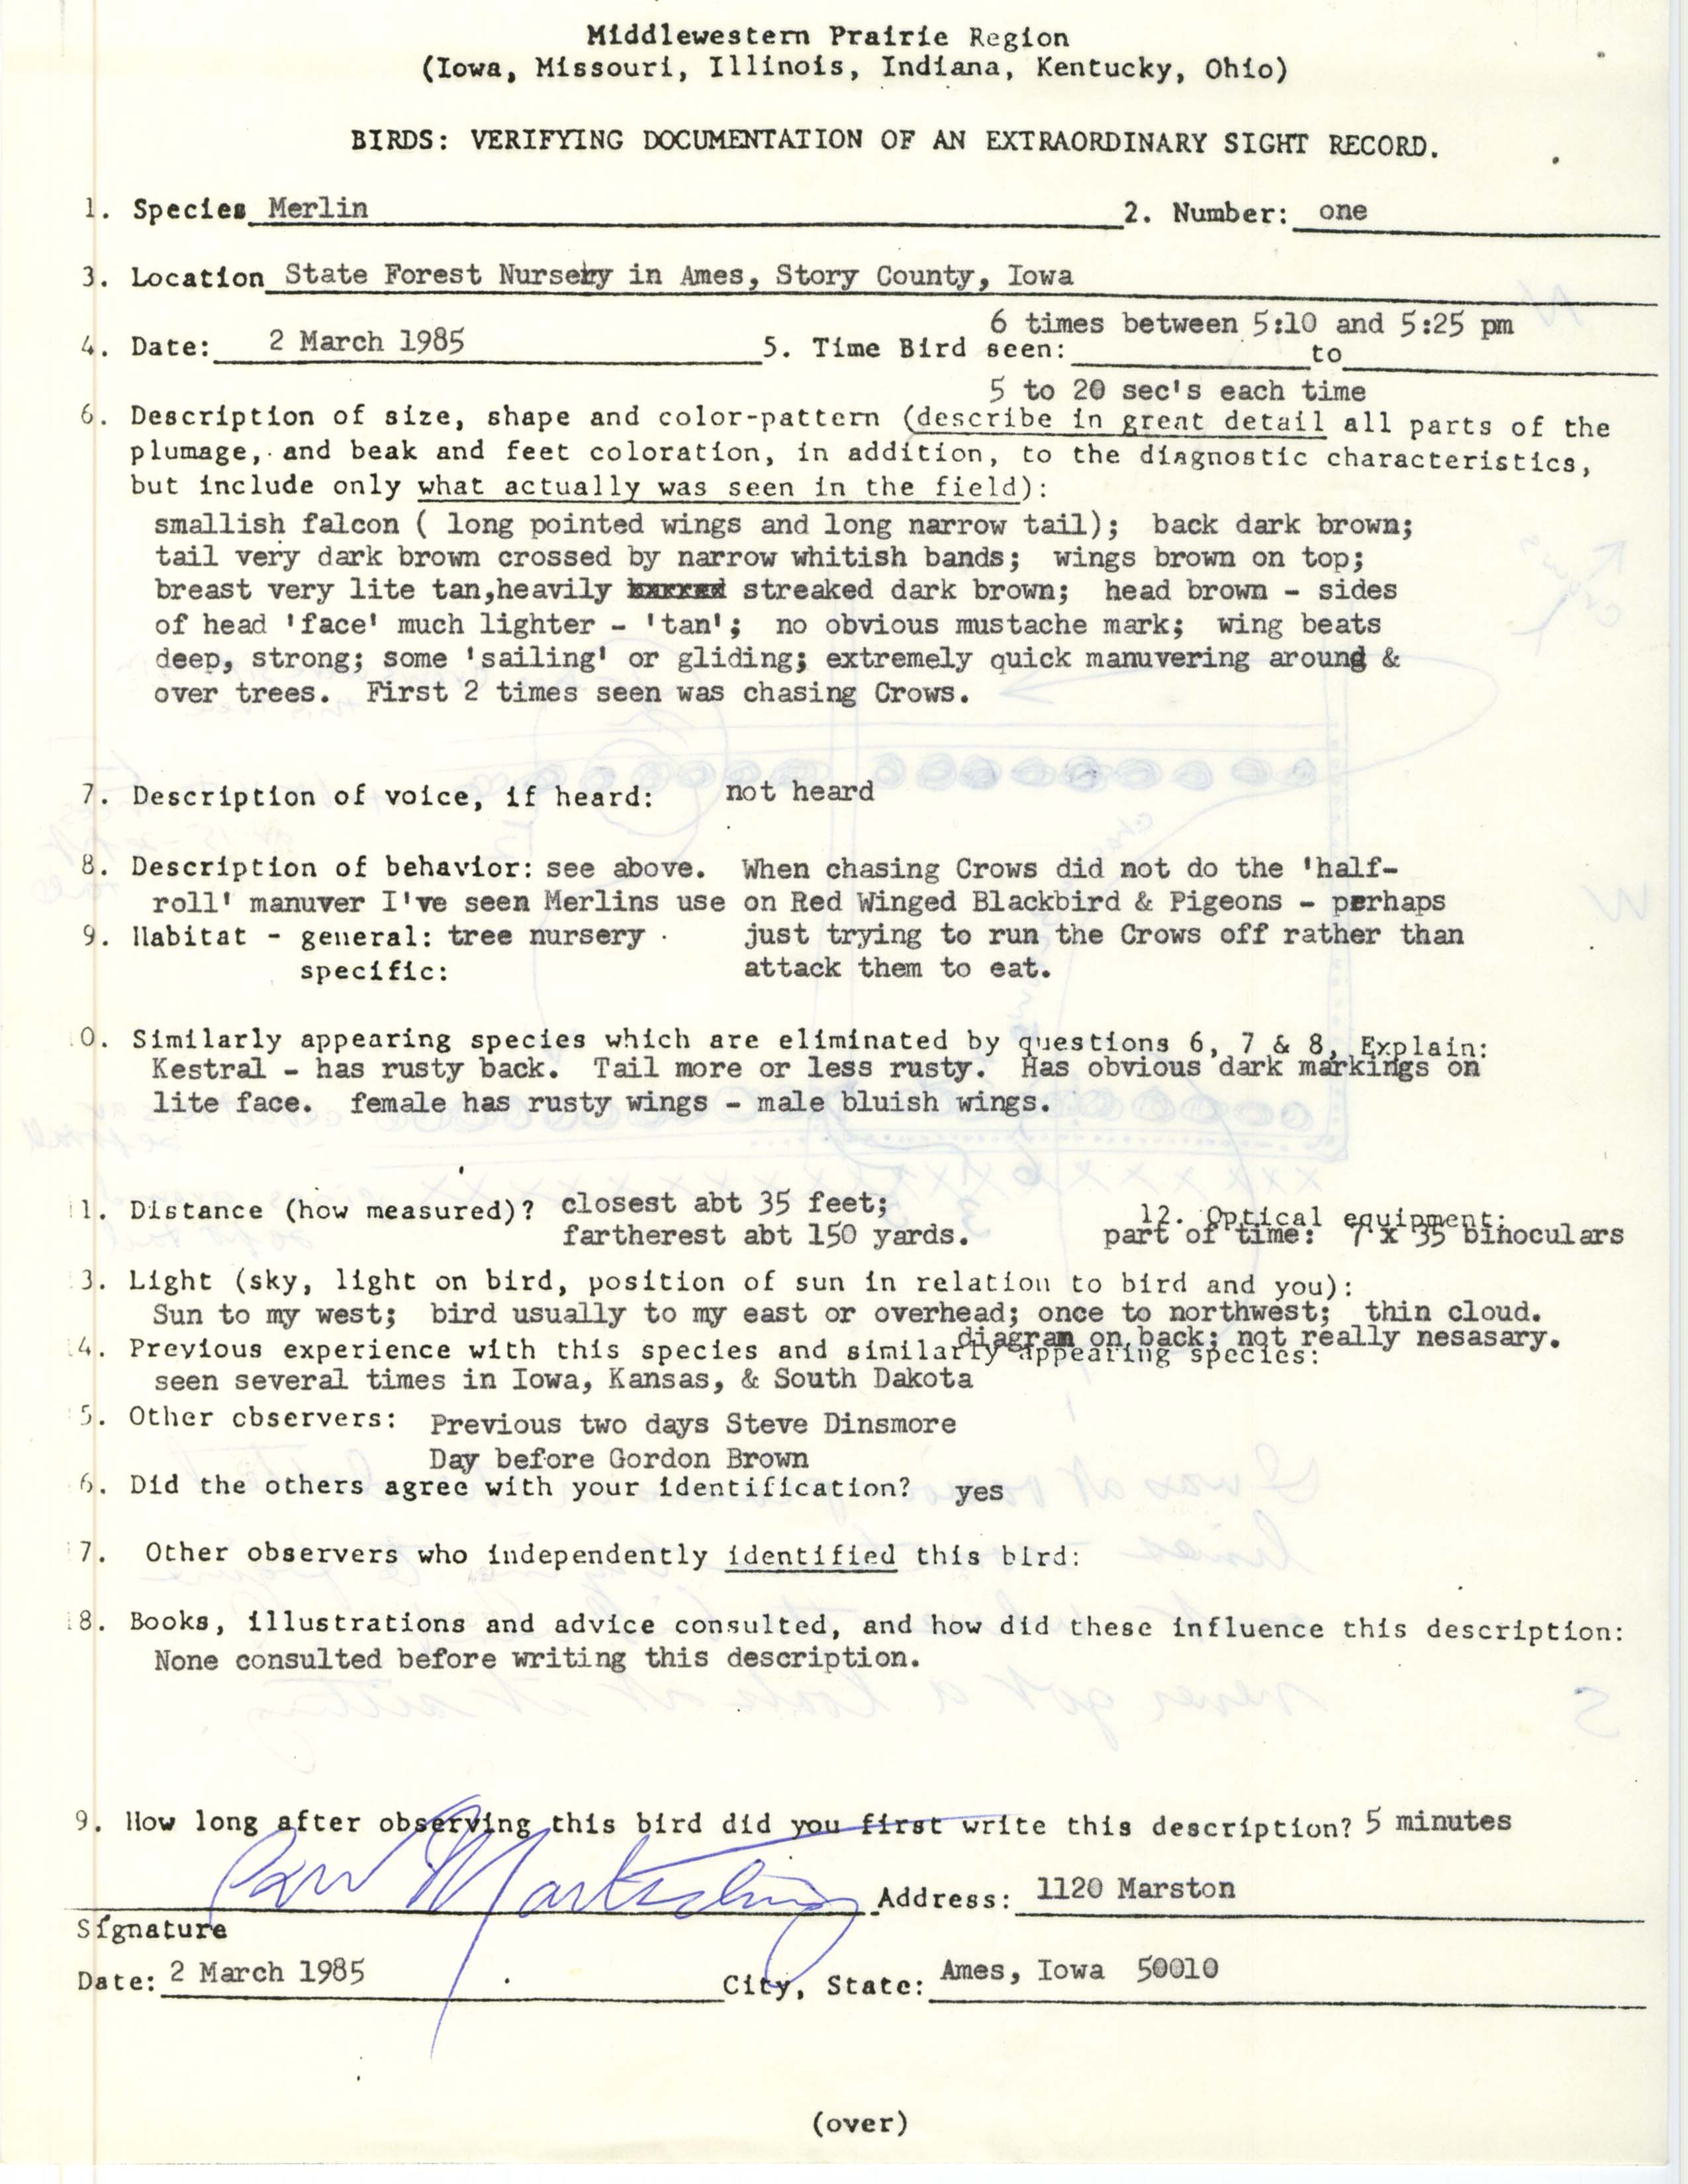 Rare bird documentation form for Merlin at State Forest Nursery, 1985